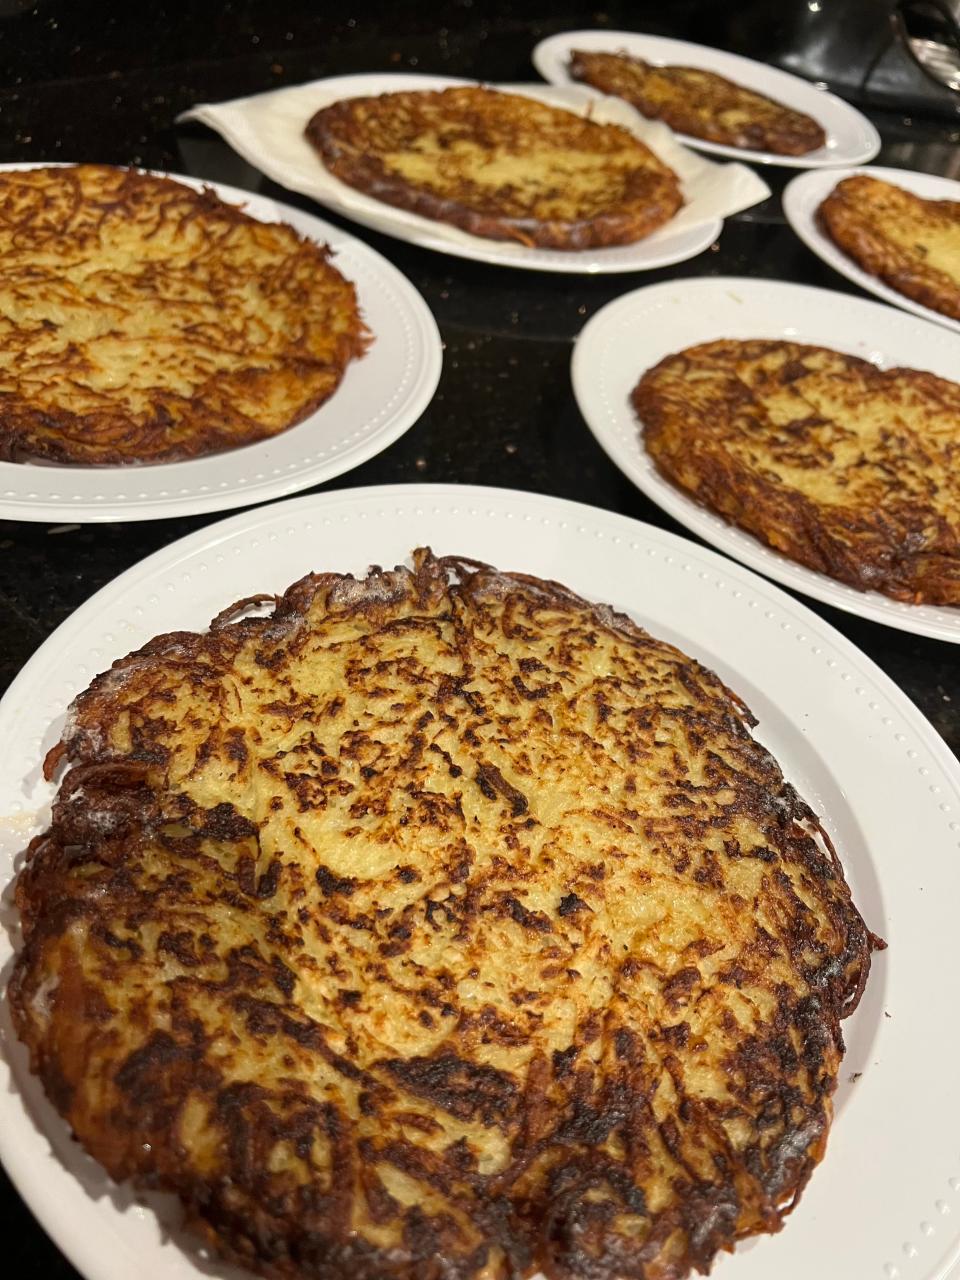 Levi Stein invites hundreds of his neighbors over to enjoy his Jumbo Stein Latkes during Hanukkah. Each 12- to 14-inch latke is meant to serve a family.